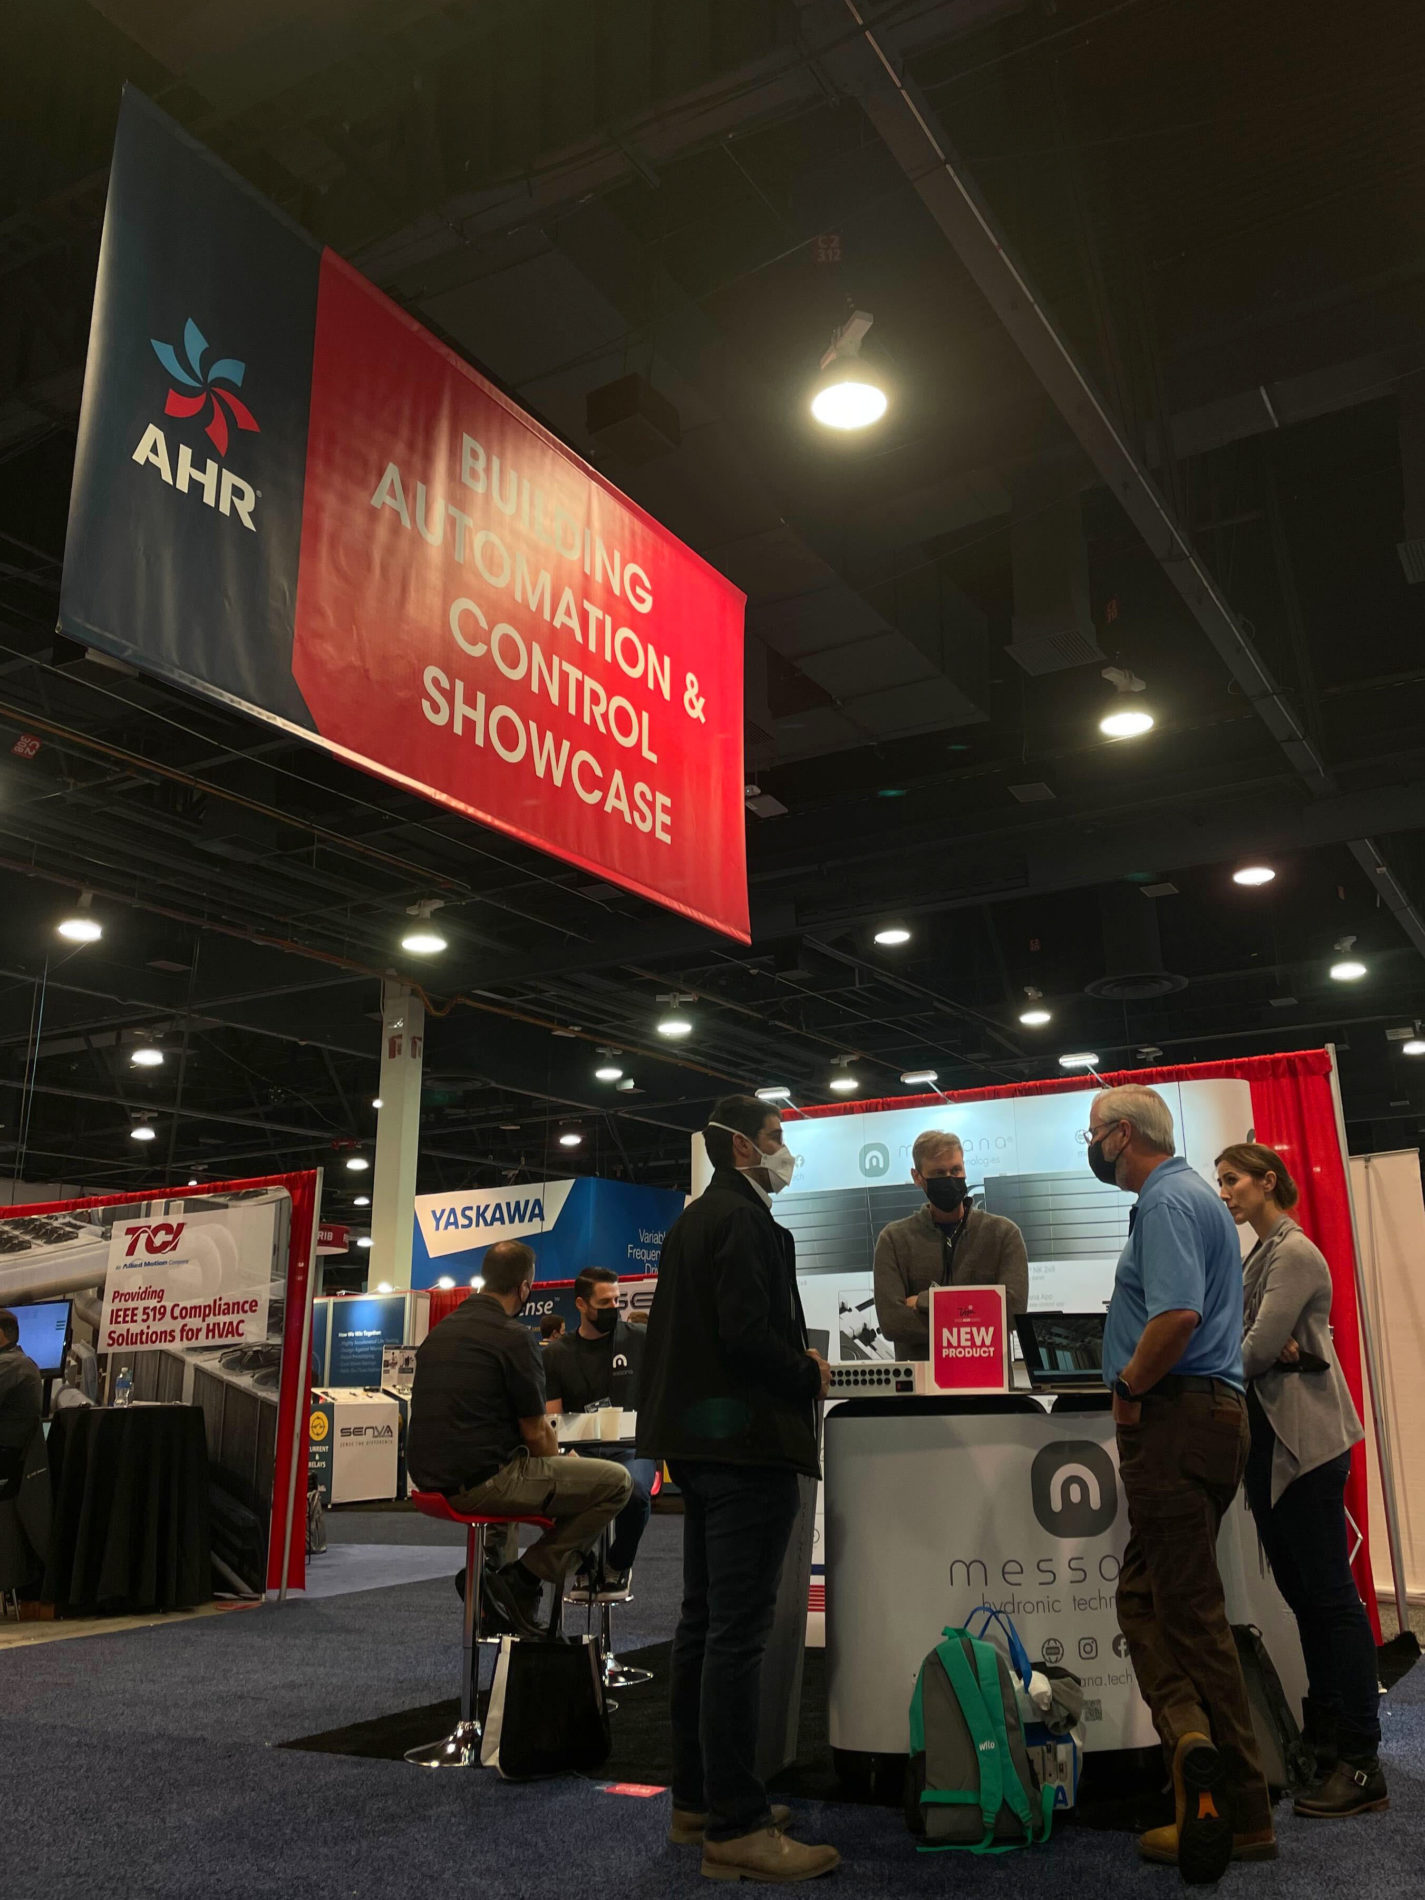 The 2022 AHR Expo has come to an end!